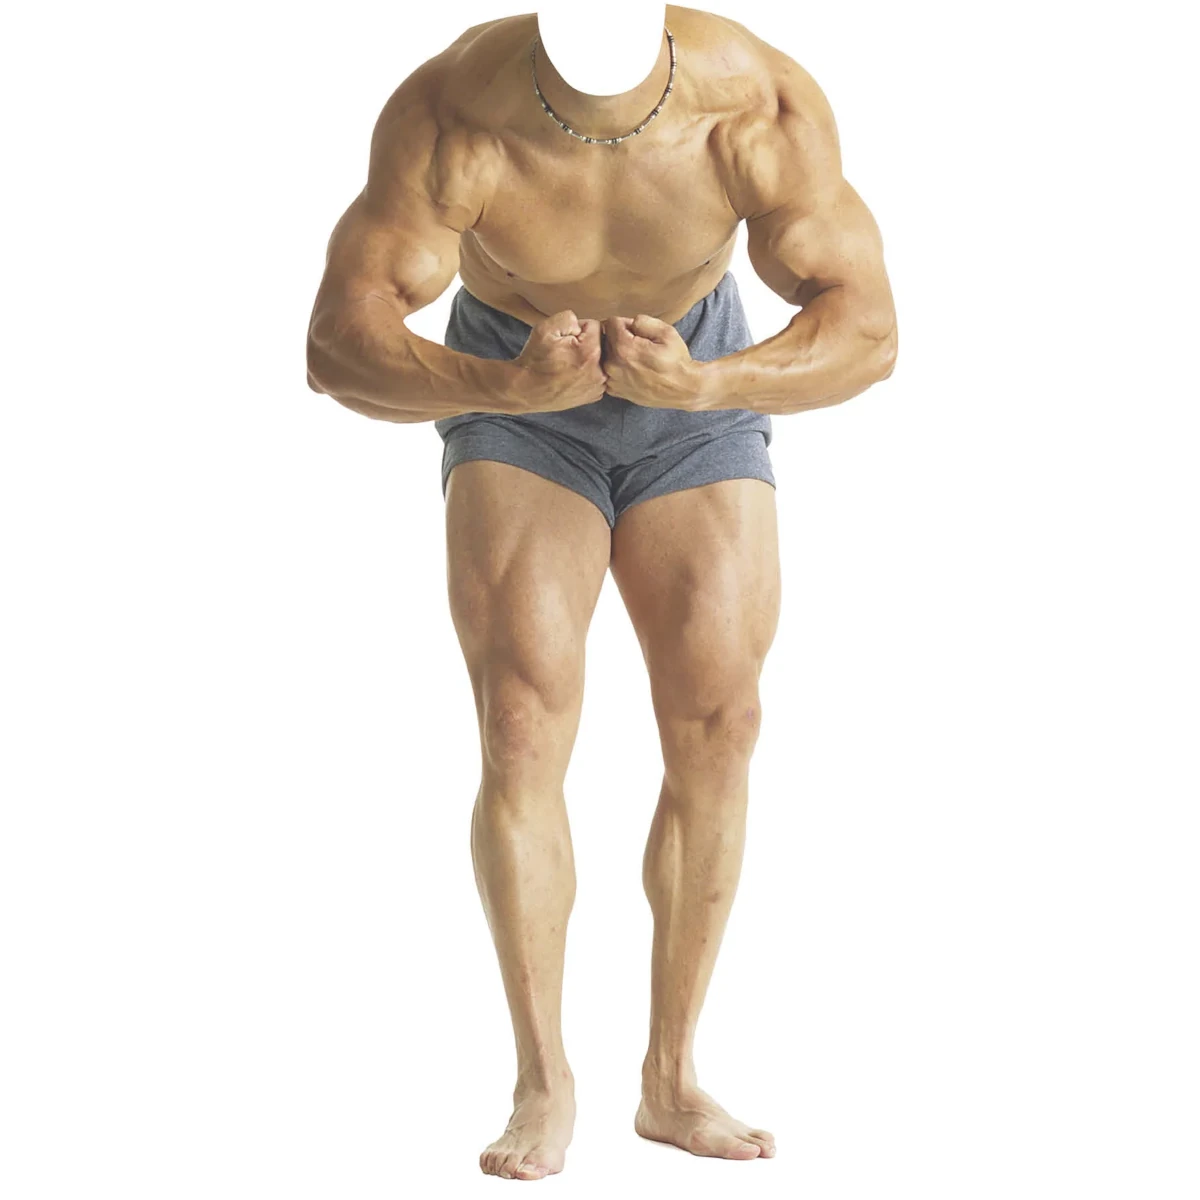 SC699 Muscle Man Stand-In Lifesize Cardboard Cutout Standee Front